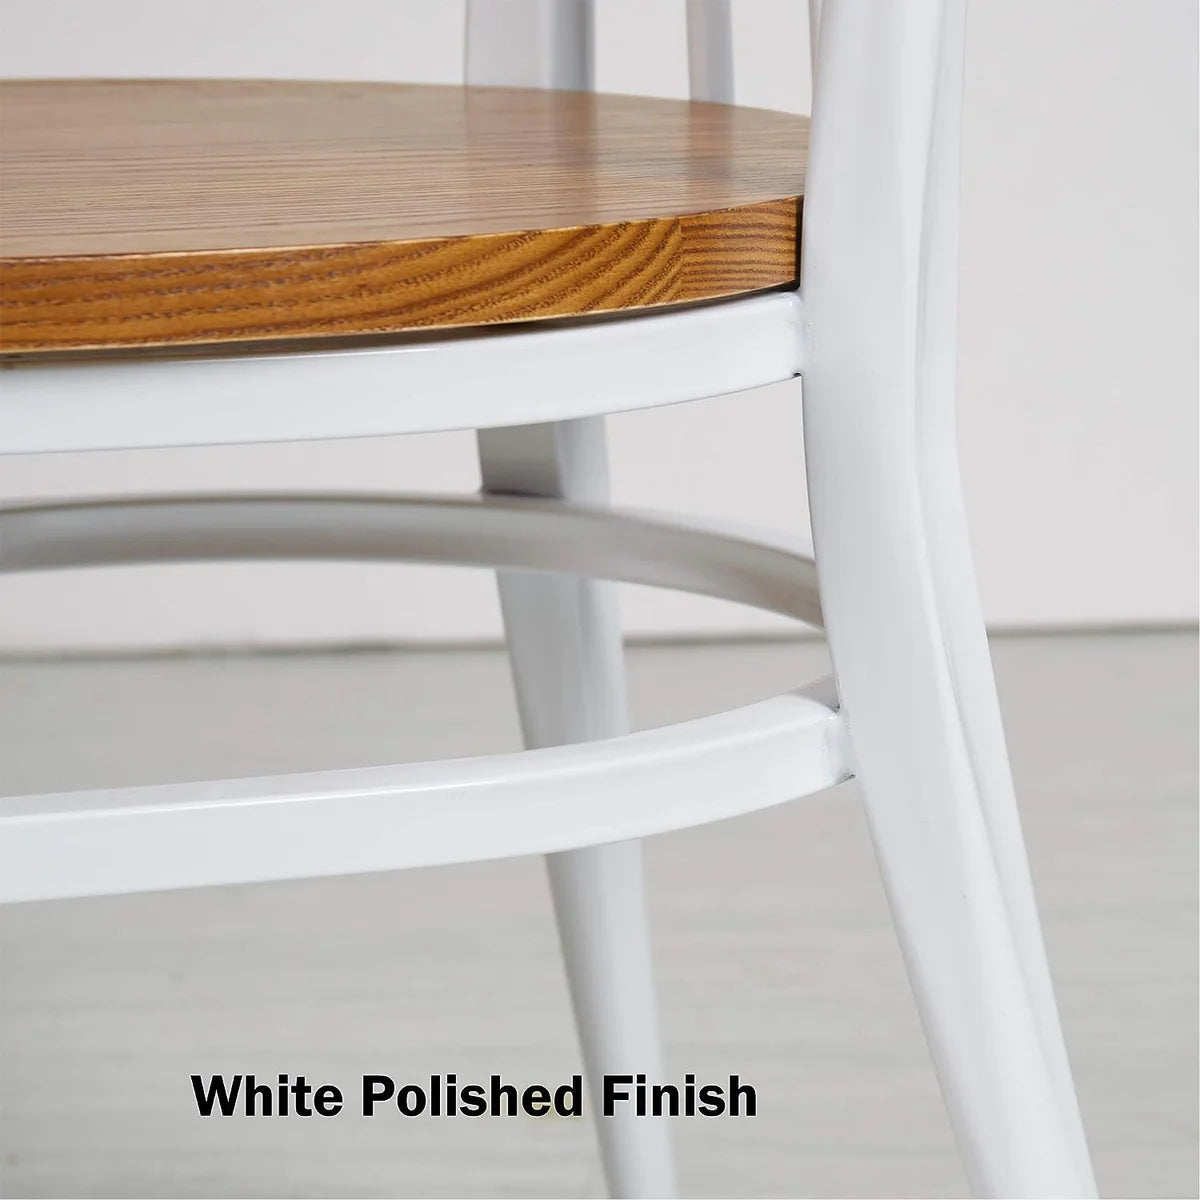 2 Set of   Natural Wood Seat Iron Frame Kitchen Chairs Dining Side Chairs, Comb Back White